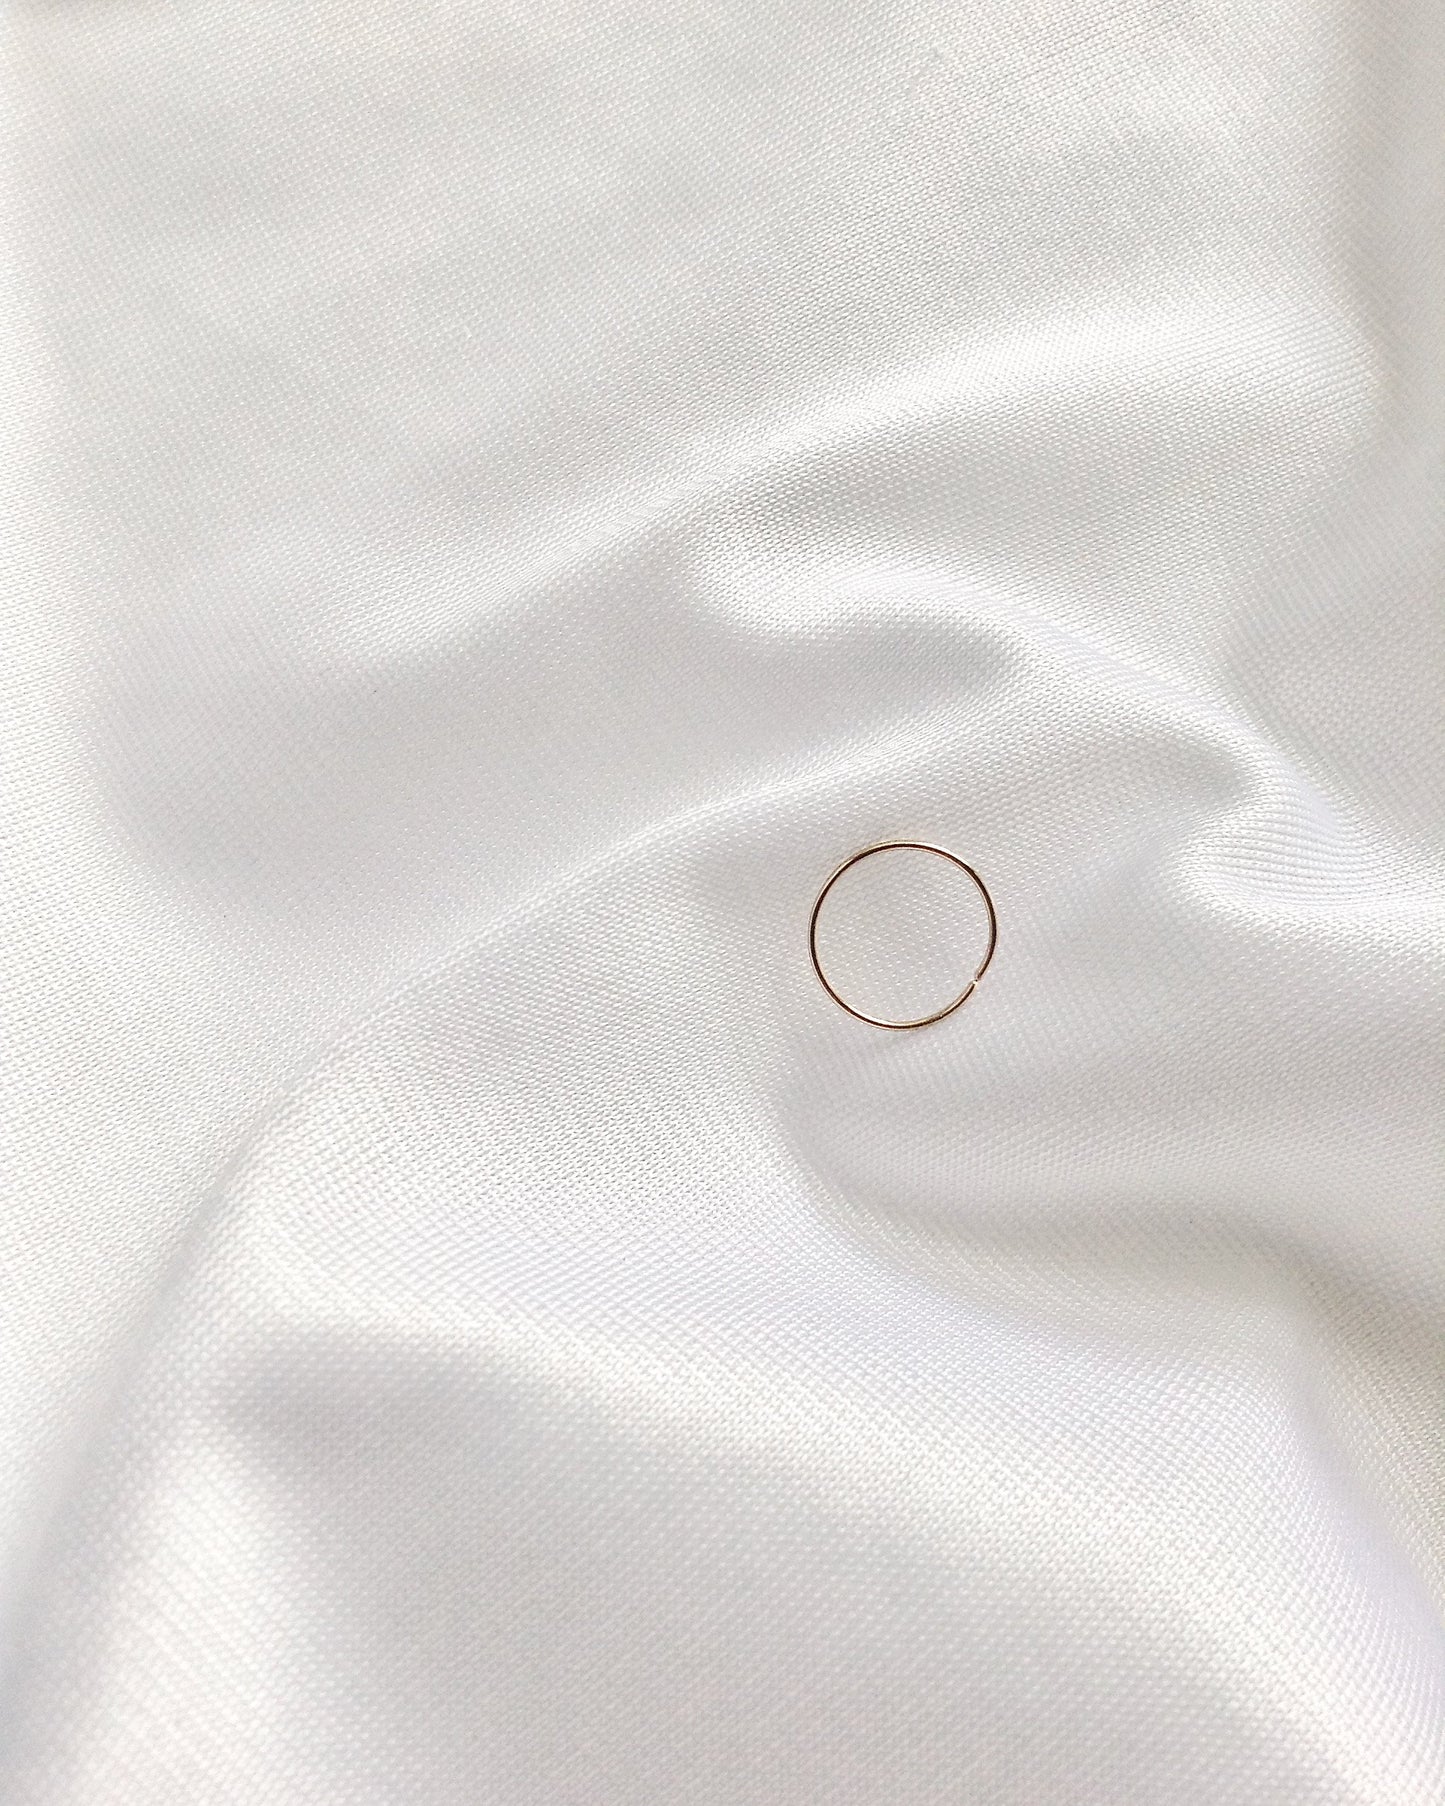 20g 22g or 24g 14K Solid Gold Nose Hoop | Real Gold Nose Hoop | IB Jewelry